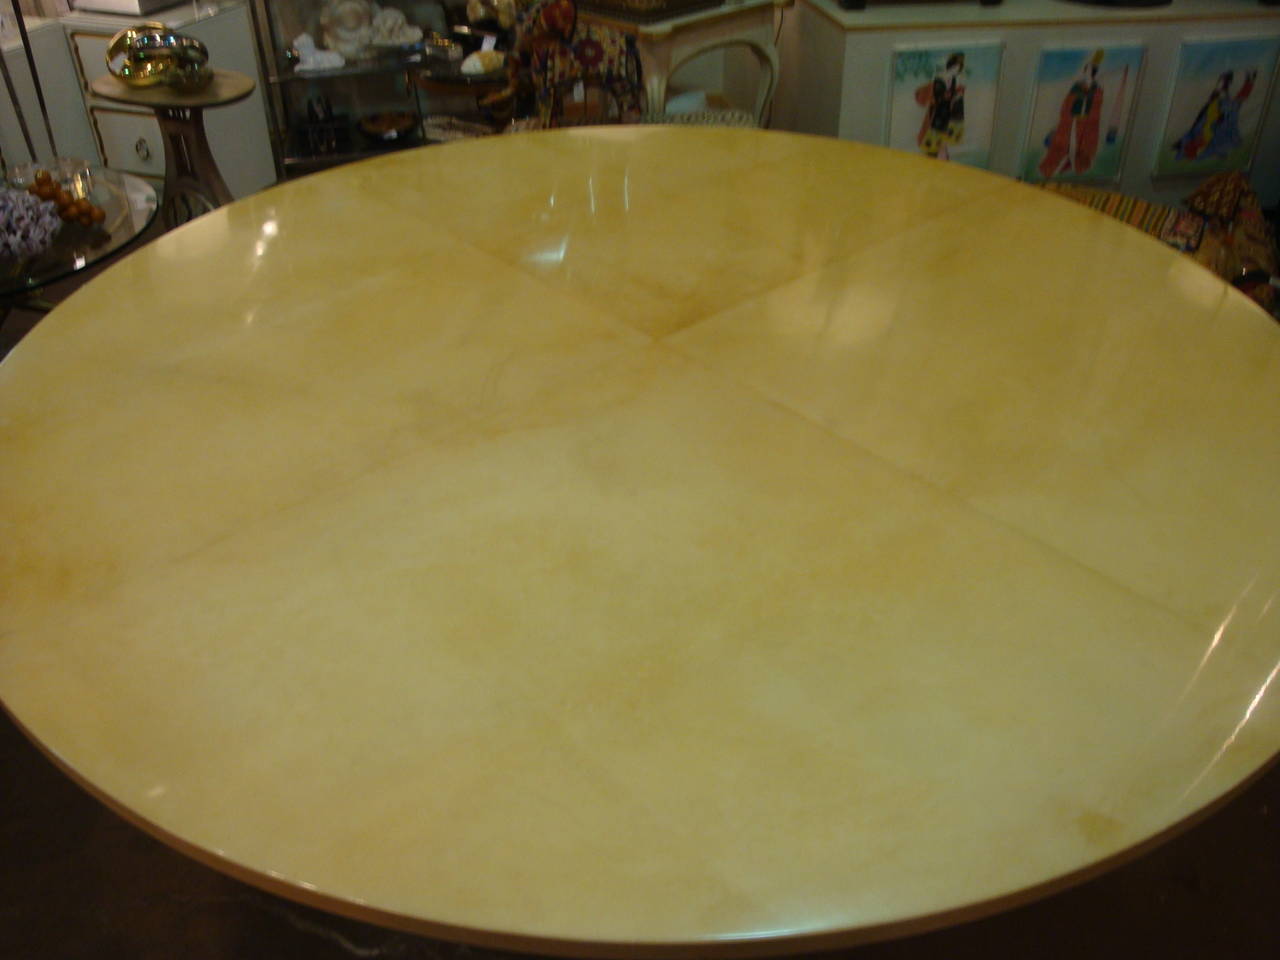 This is a 72 inch lacquered goatskin table in the style of Karl springer from 1970s